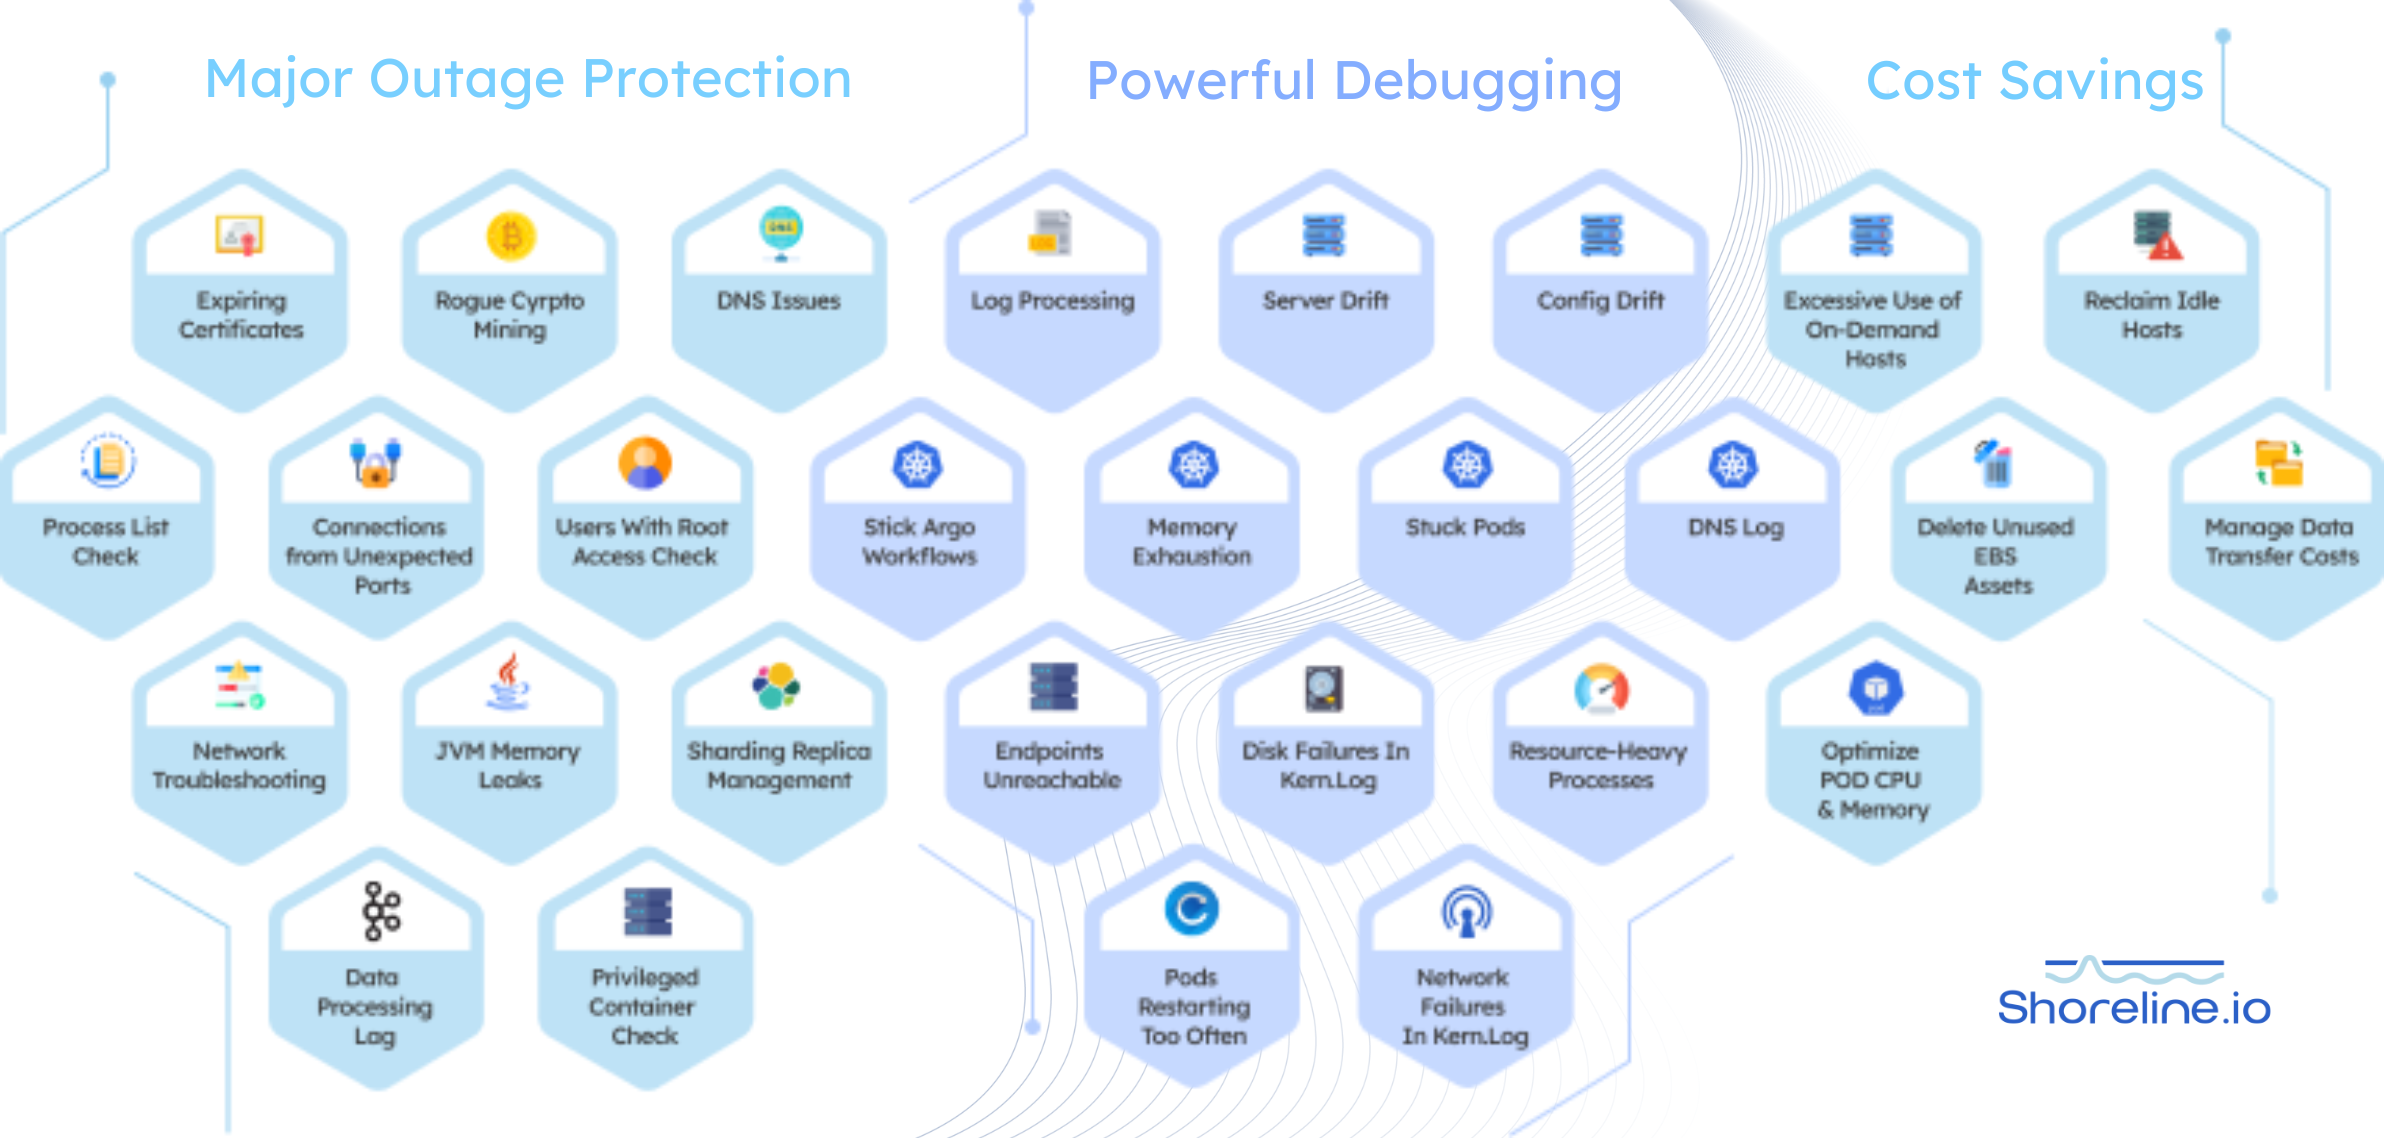 Prebuilt Runbooks and Automations for: Major Outage Protection, Powerful Debugging and Cost Savings